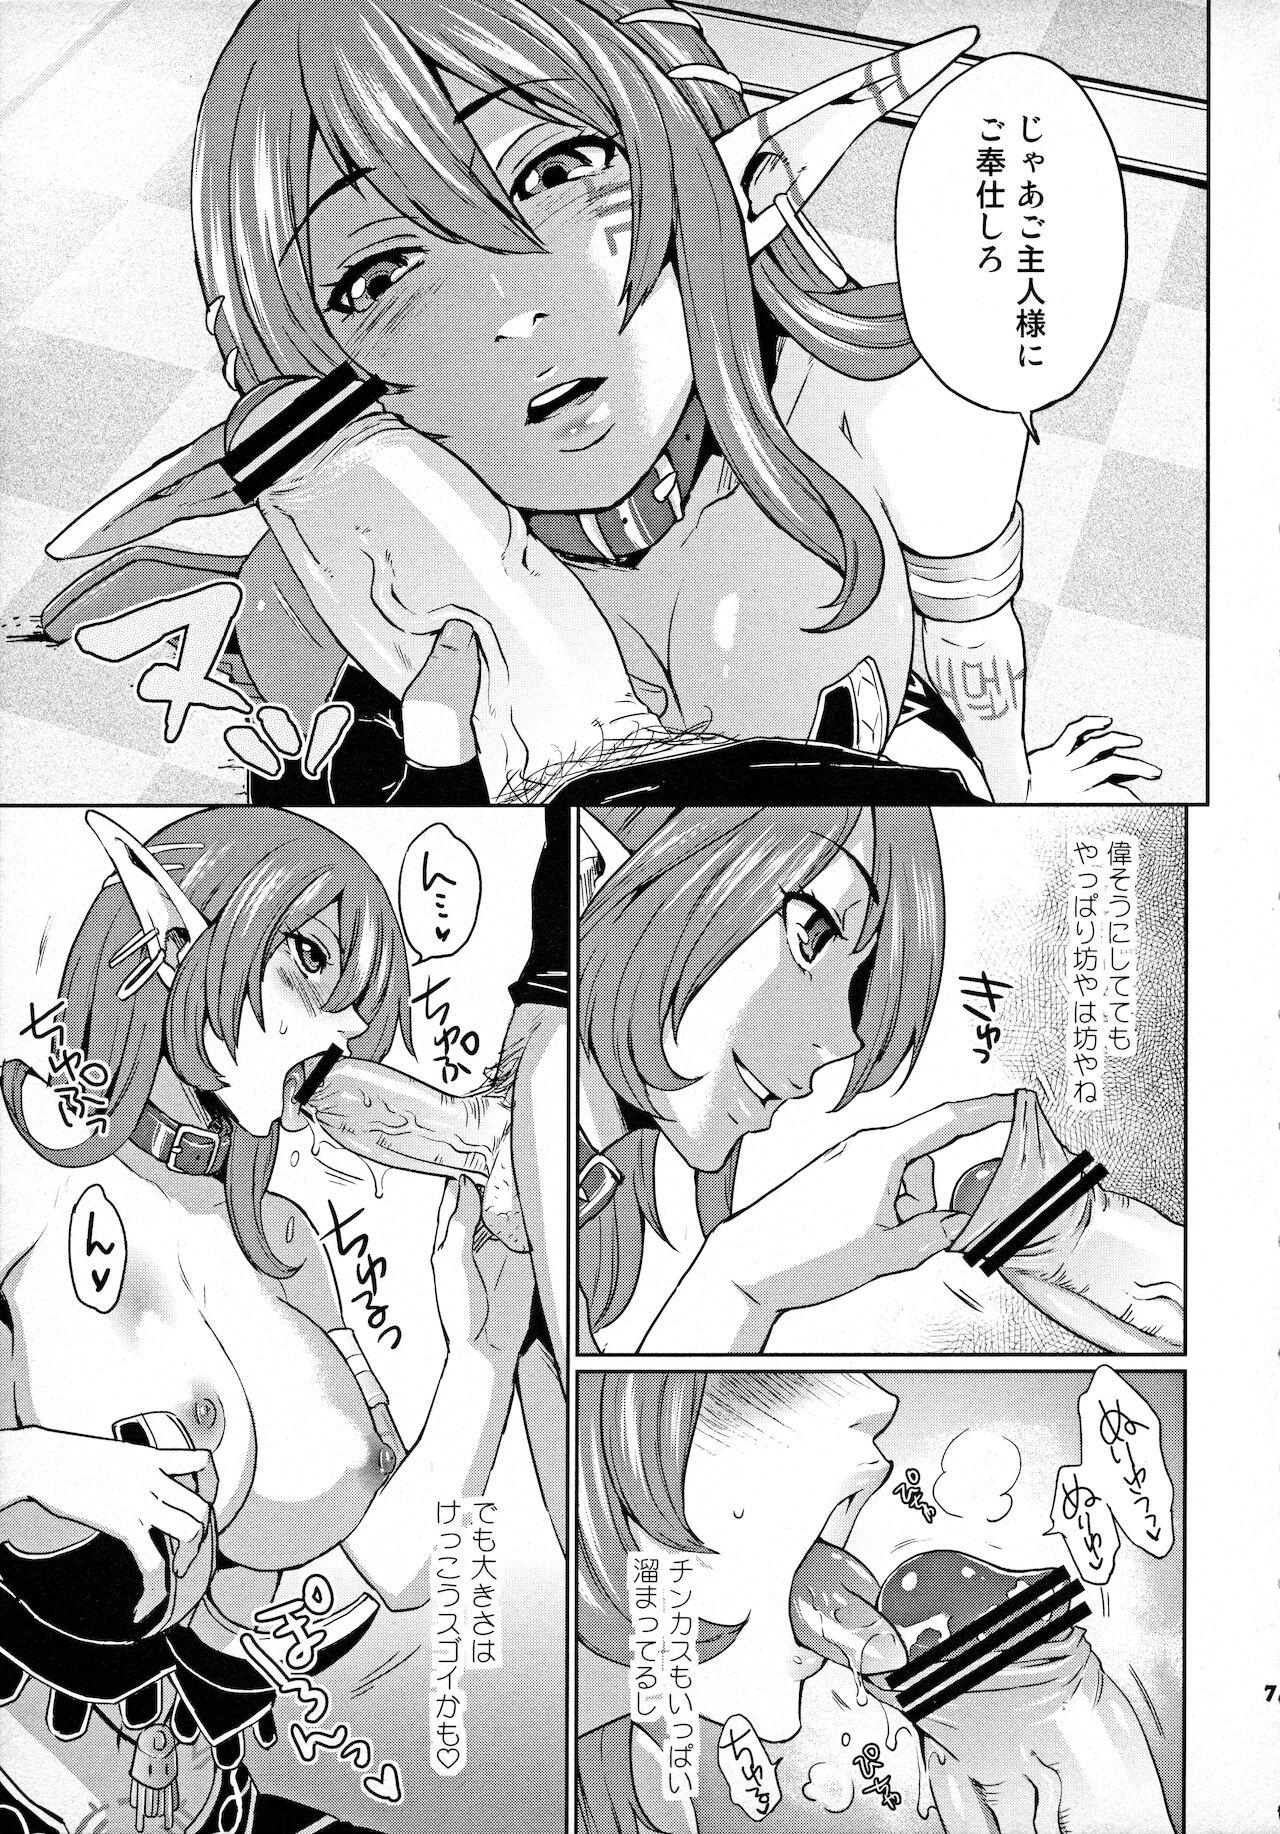 Mexicana Hoshi no Umi no Miboujin - The Widow of The Star Ocean - Star ocean 4 Gay Straight - Page 6